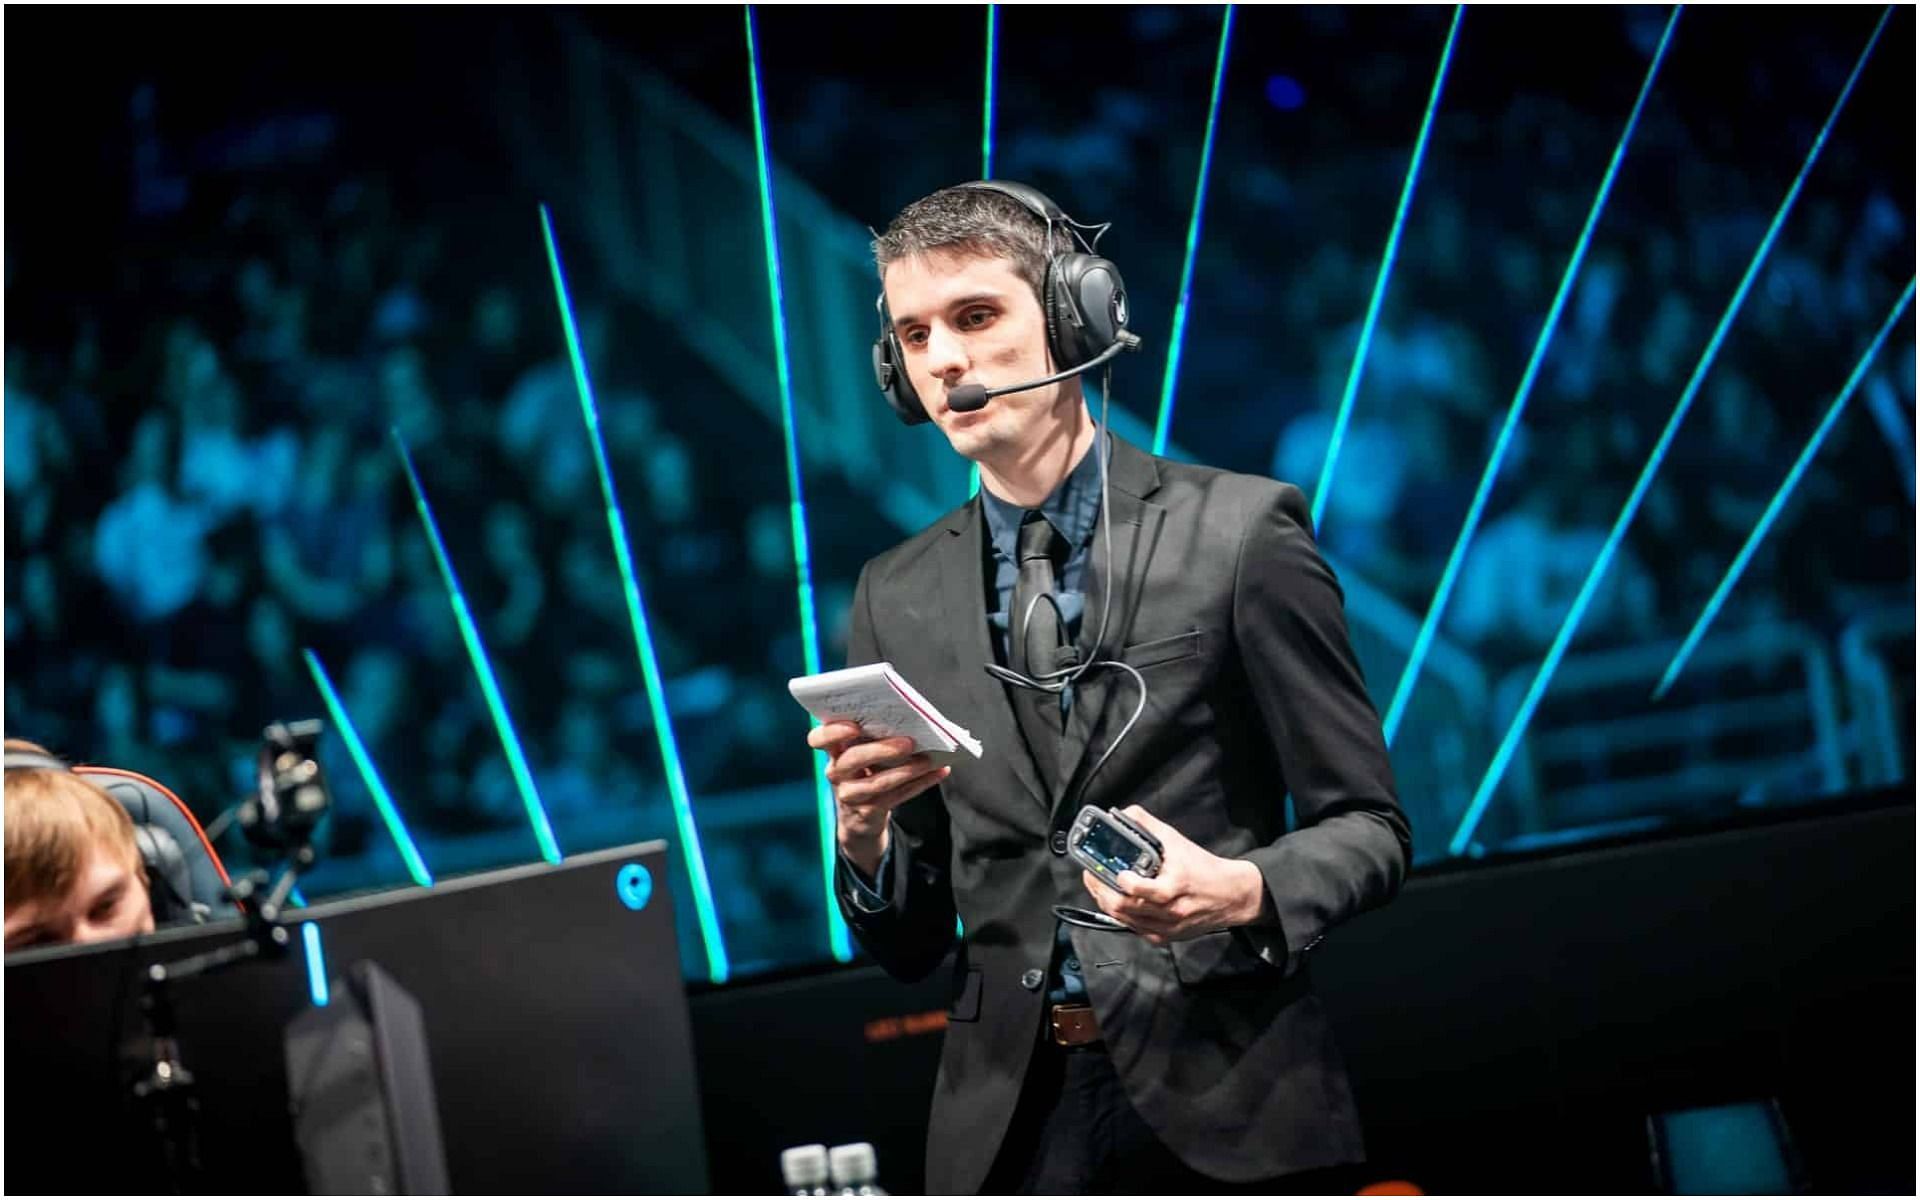 Dylan Falco could propel G2 Esports to a new era (Image via League of Legends)